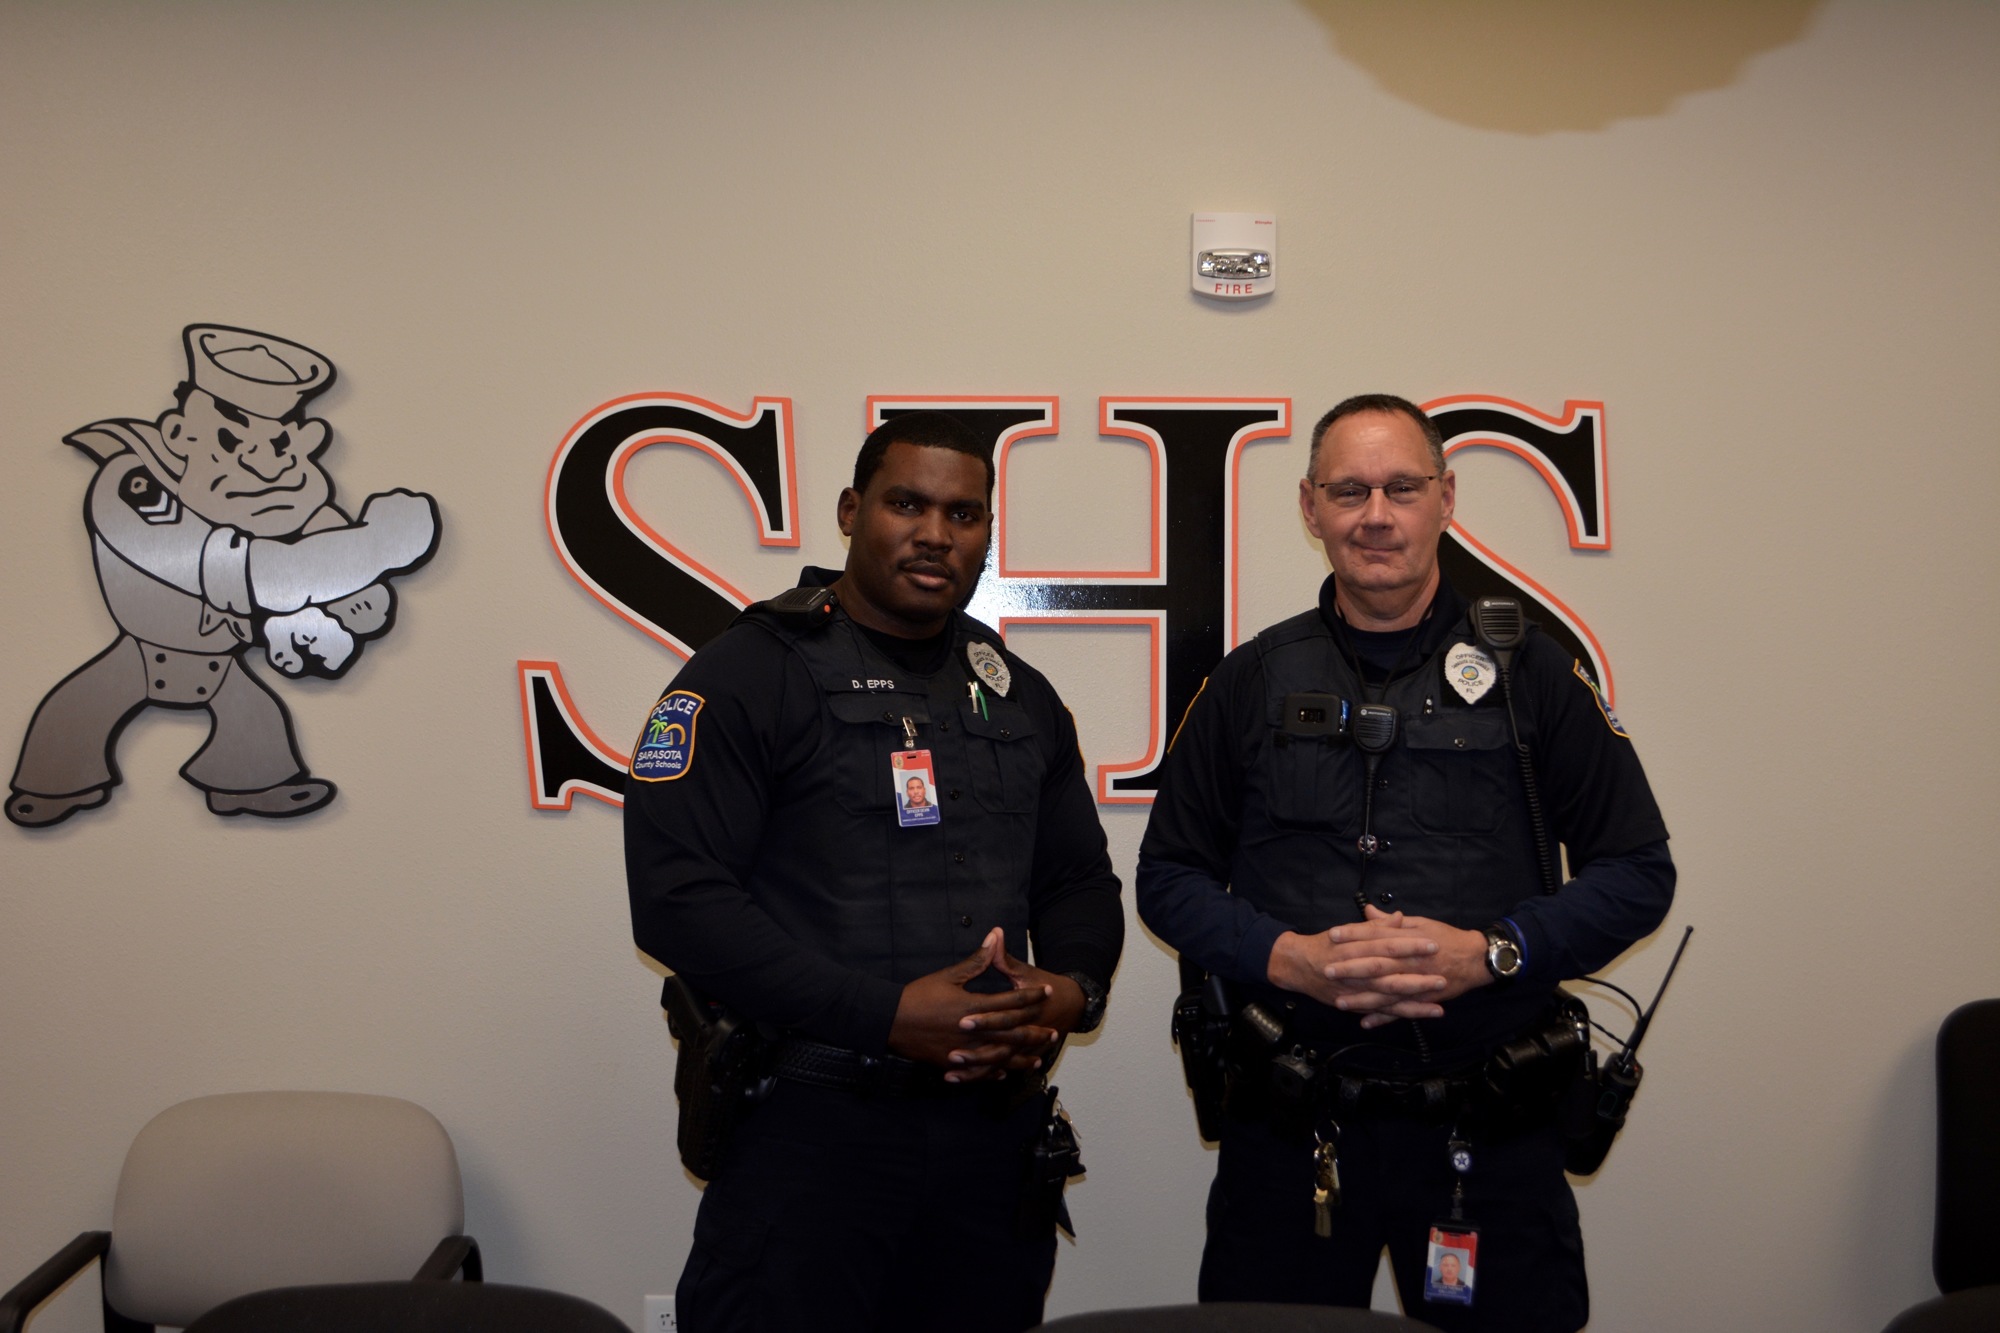 Officers David Epps (left) and Thomas Gallucci (right) are school resource officers for Sarasota High School.